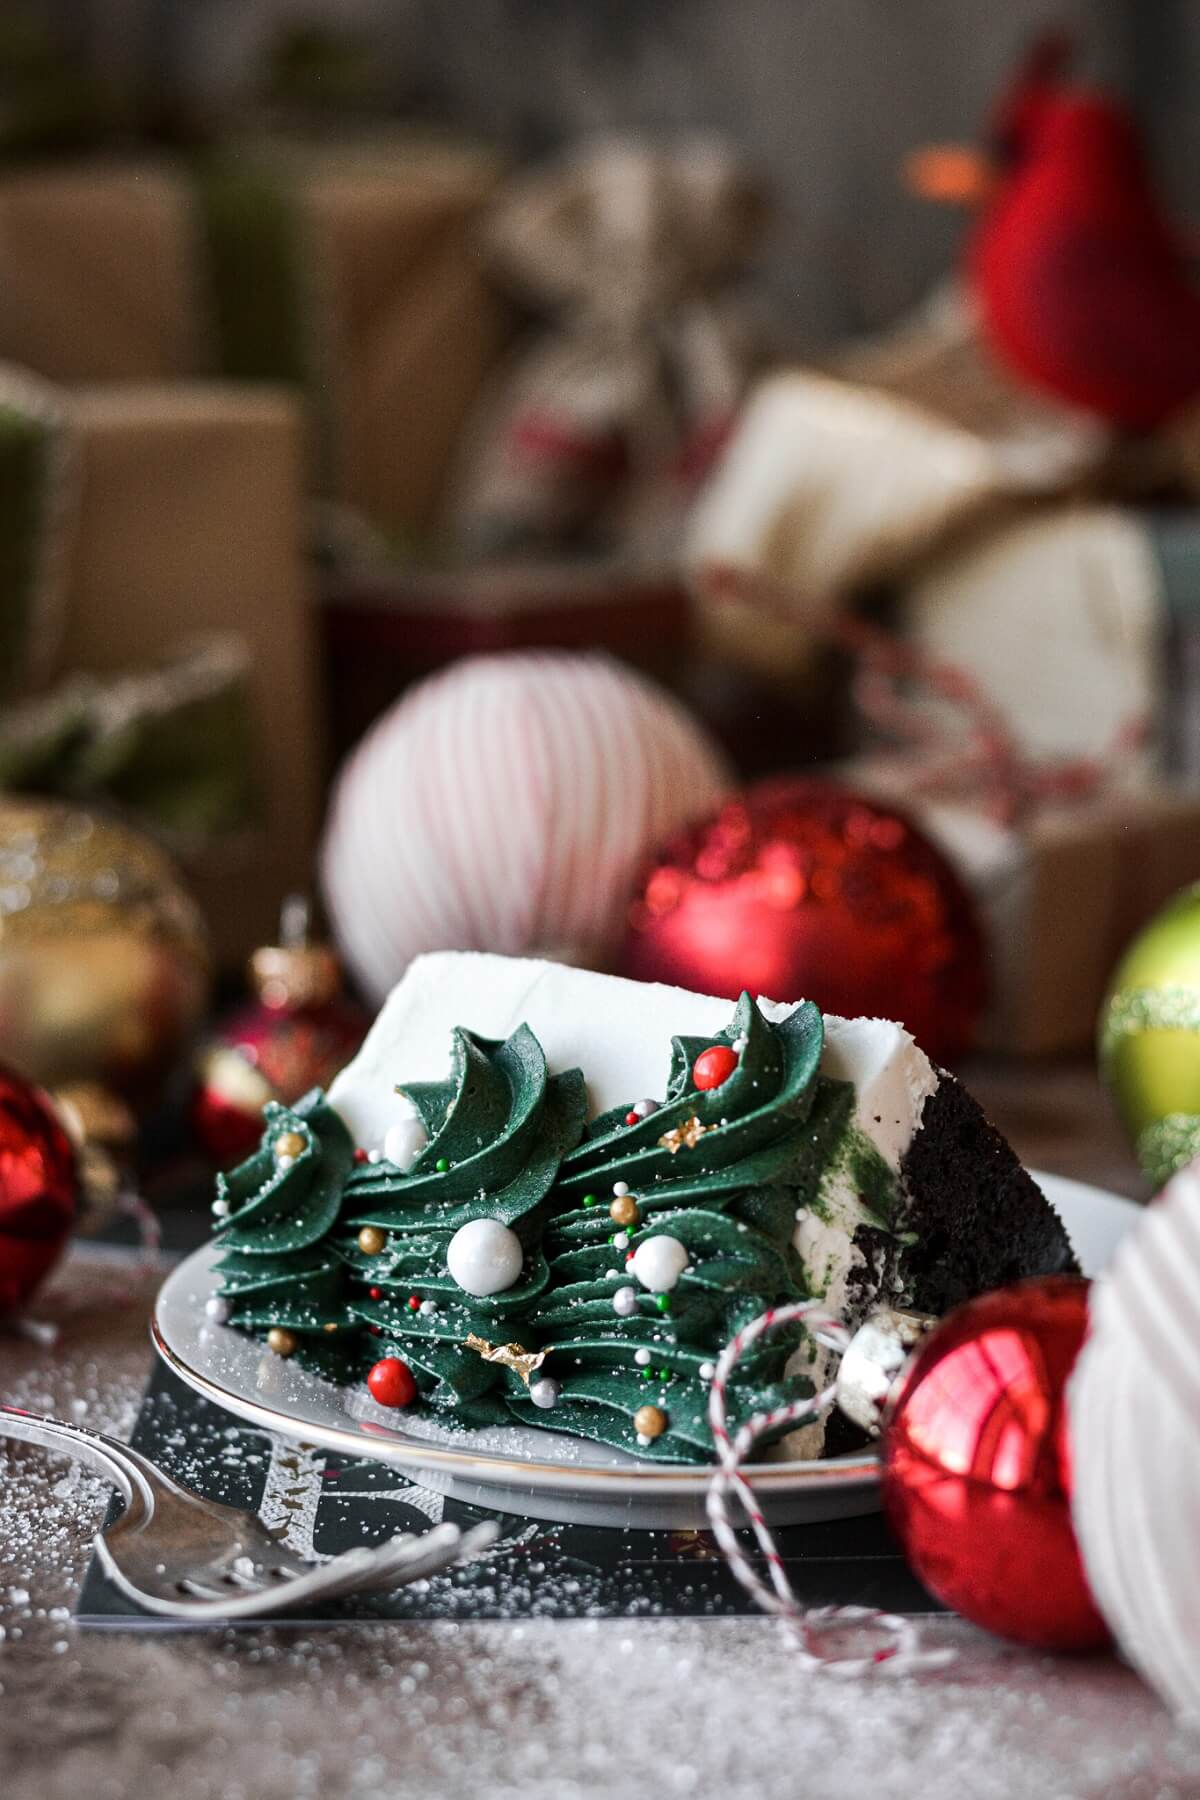 Slice of cake with a buttercream Christmas tree.